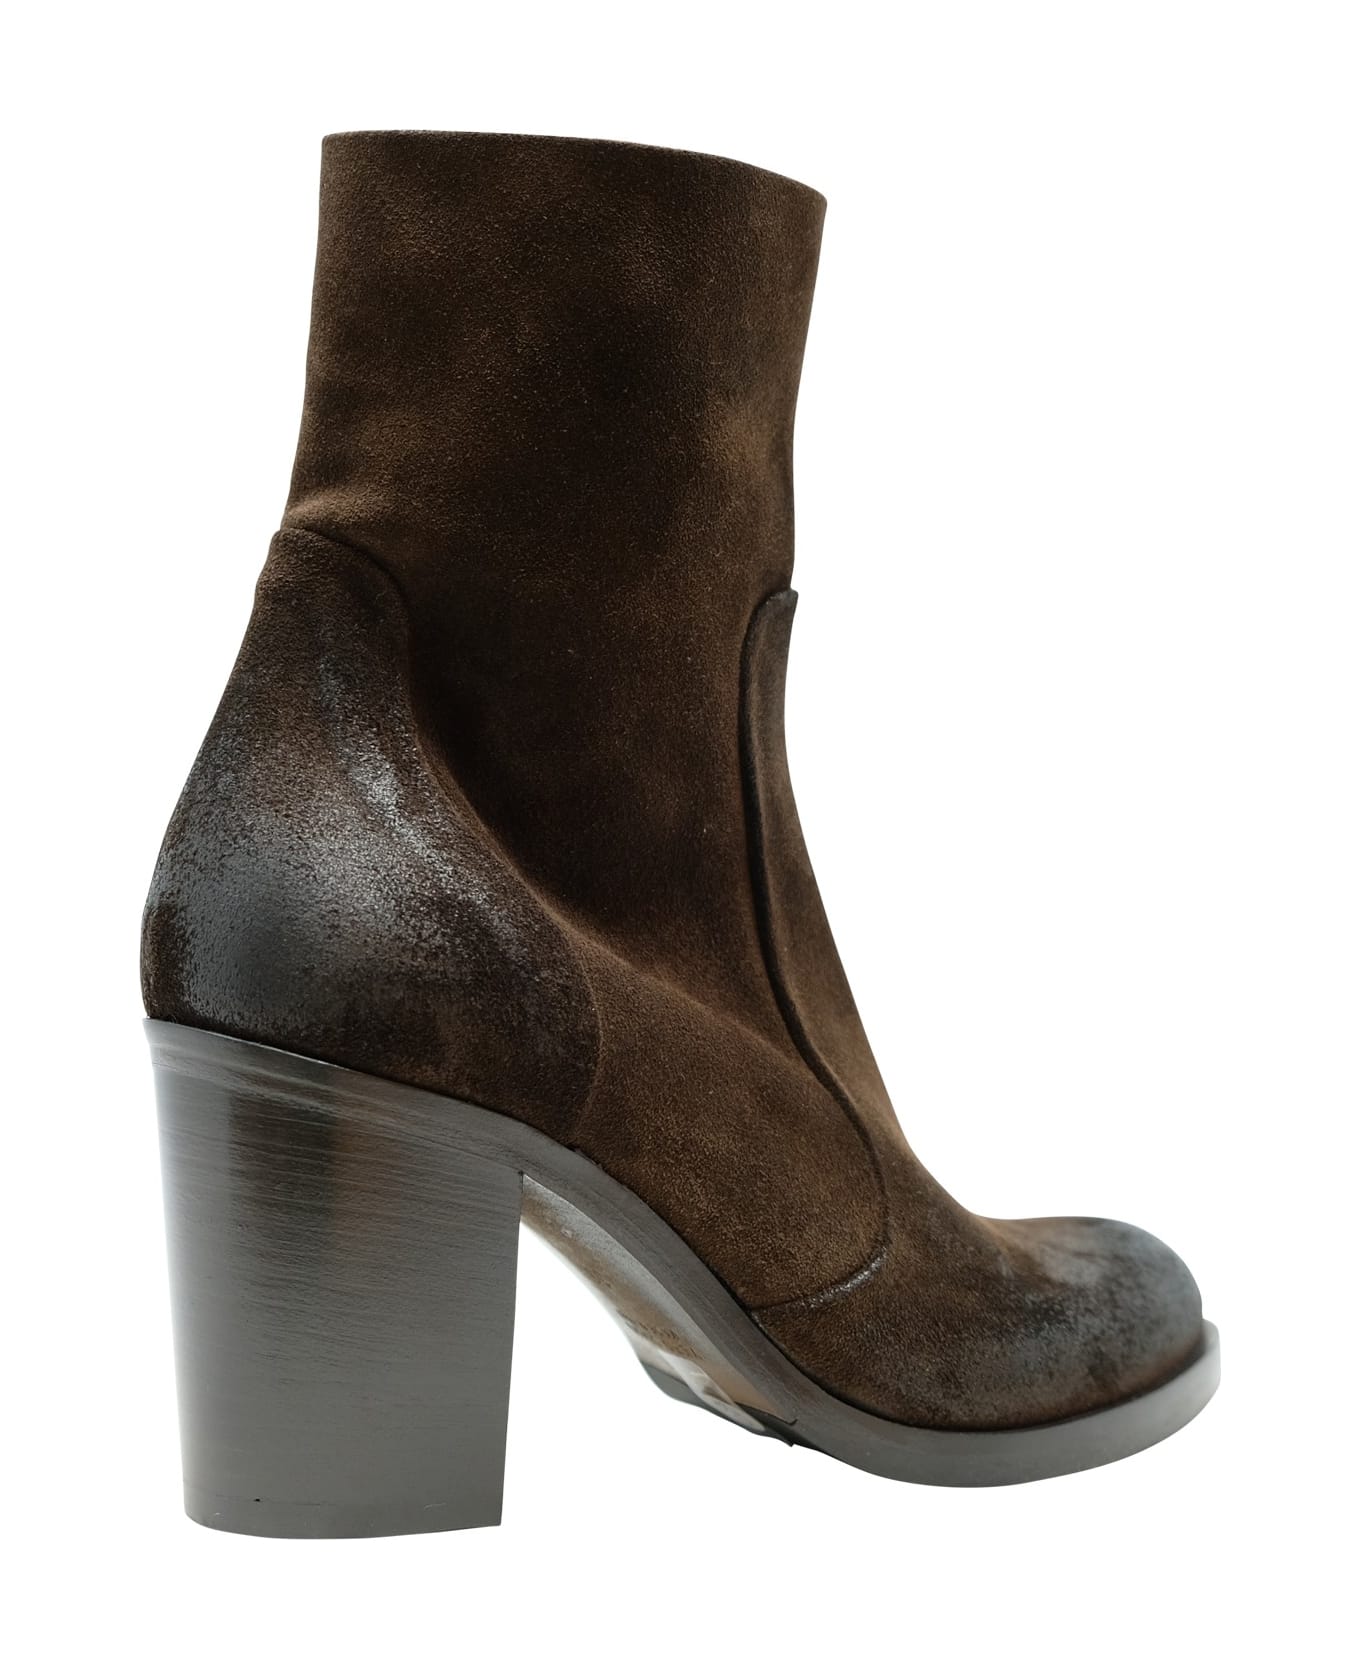 Elena Iachi Suede Leather Ankle Boots - BROWN ブーツ